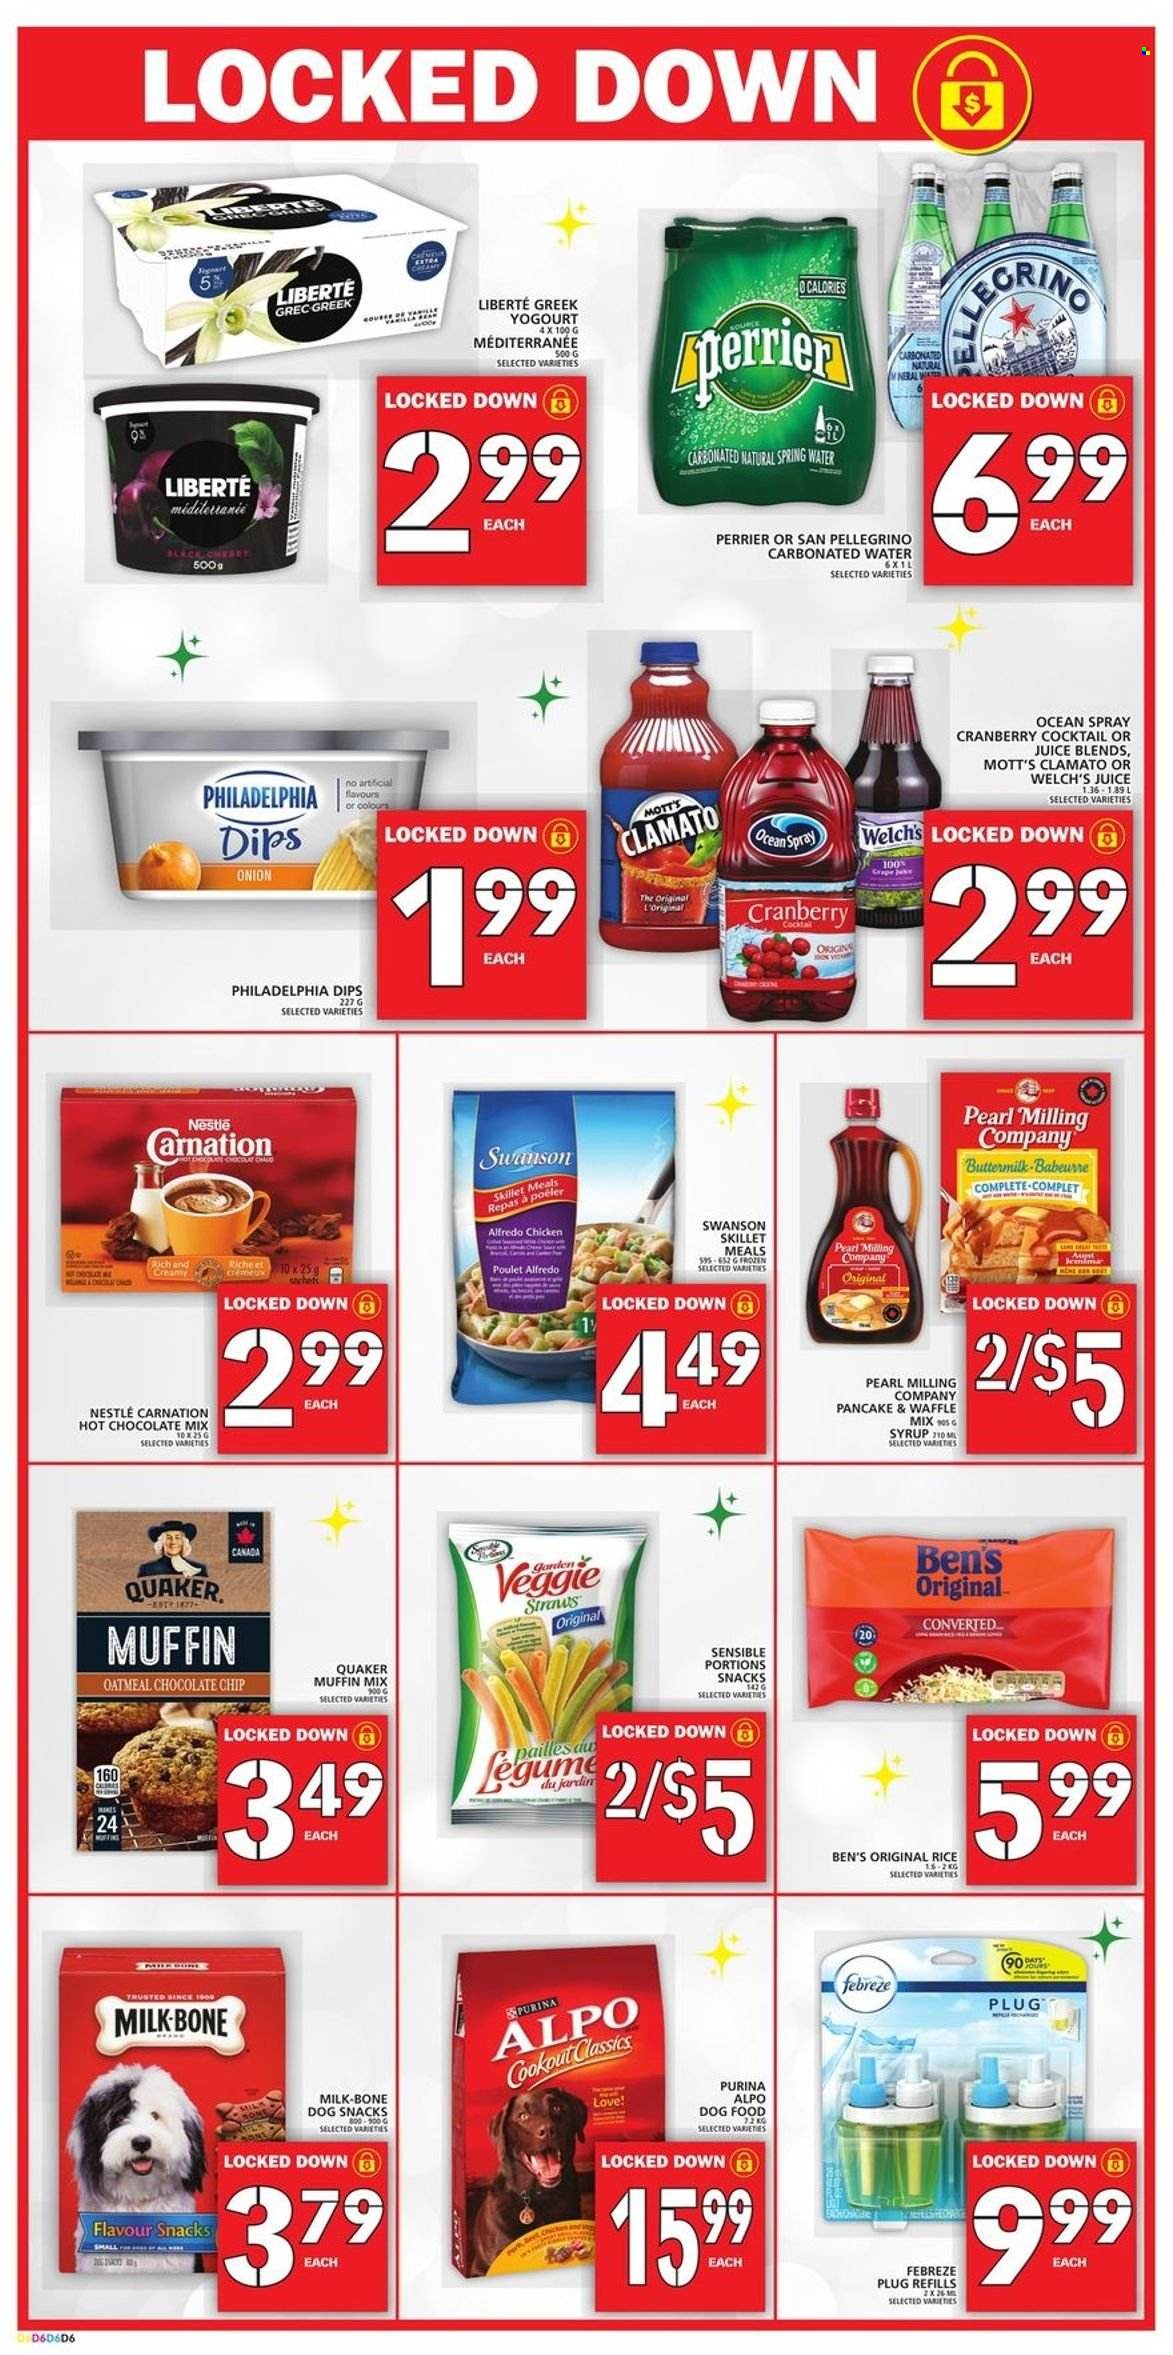 thumbnail - Food Basics Flyer - December 30, 2021 - January 05, 2022 - Sales products - muffin mix, onion, Welch's, Mott's, pancakes, Quaker, buttermilk, chocolate chips, snack, oatmeal, rice, syrup, juice, Clamato, Perrier, spring water, San Pellegrino, hot chocolate, Febreze, animal food, dog food, Purina, Alpo, Nestlé, Philadelphia. Page 7.